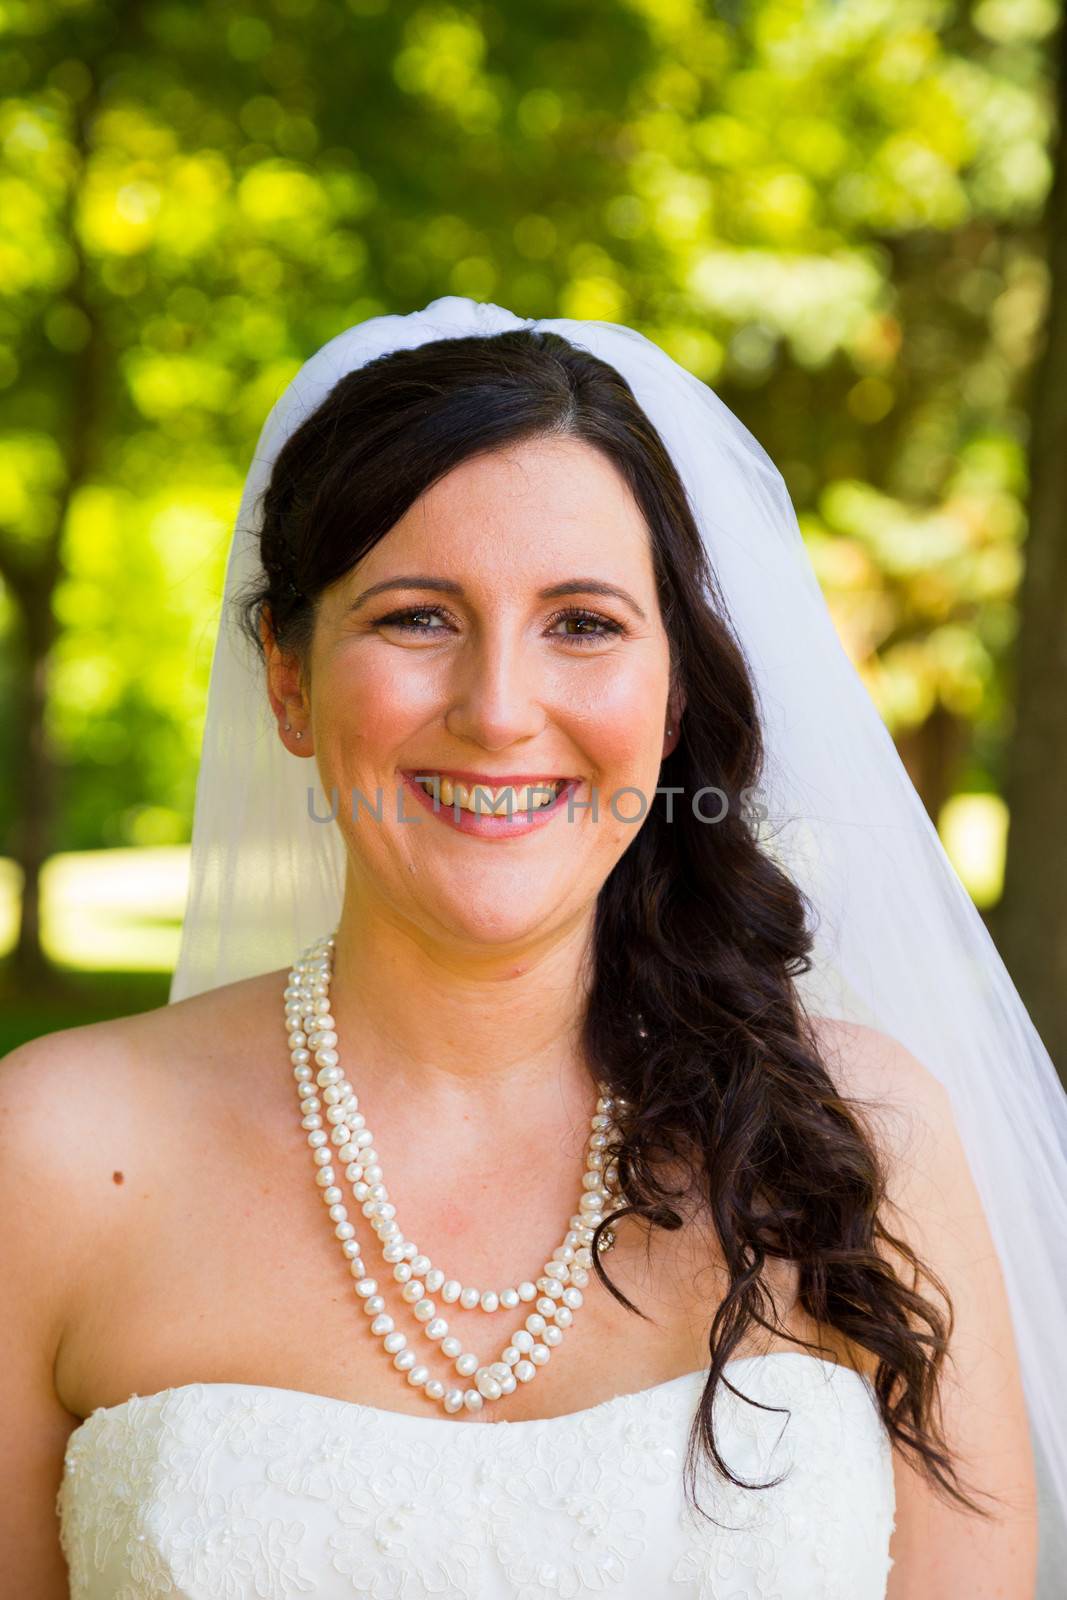 A bride poses for some portraits while wearing her wedding dress at a park outdoors just before here wedding ceremony.